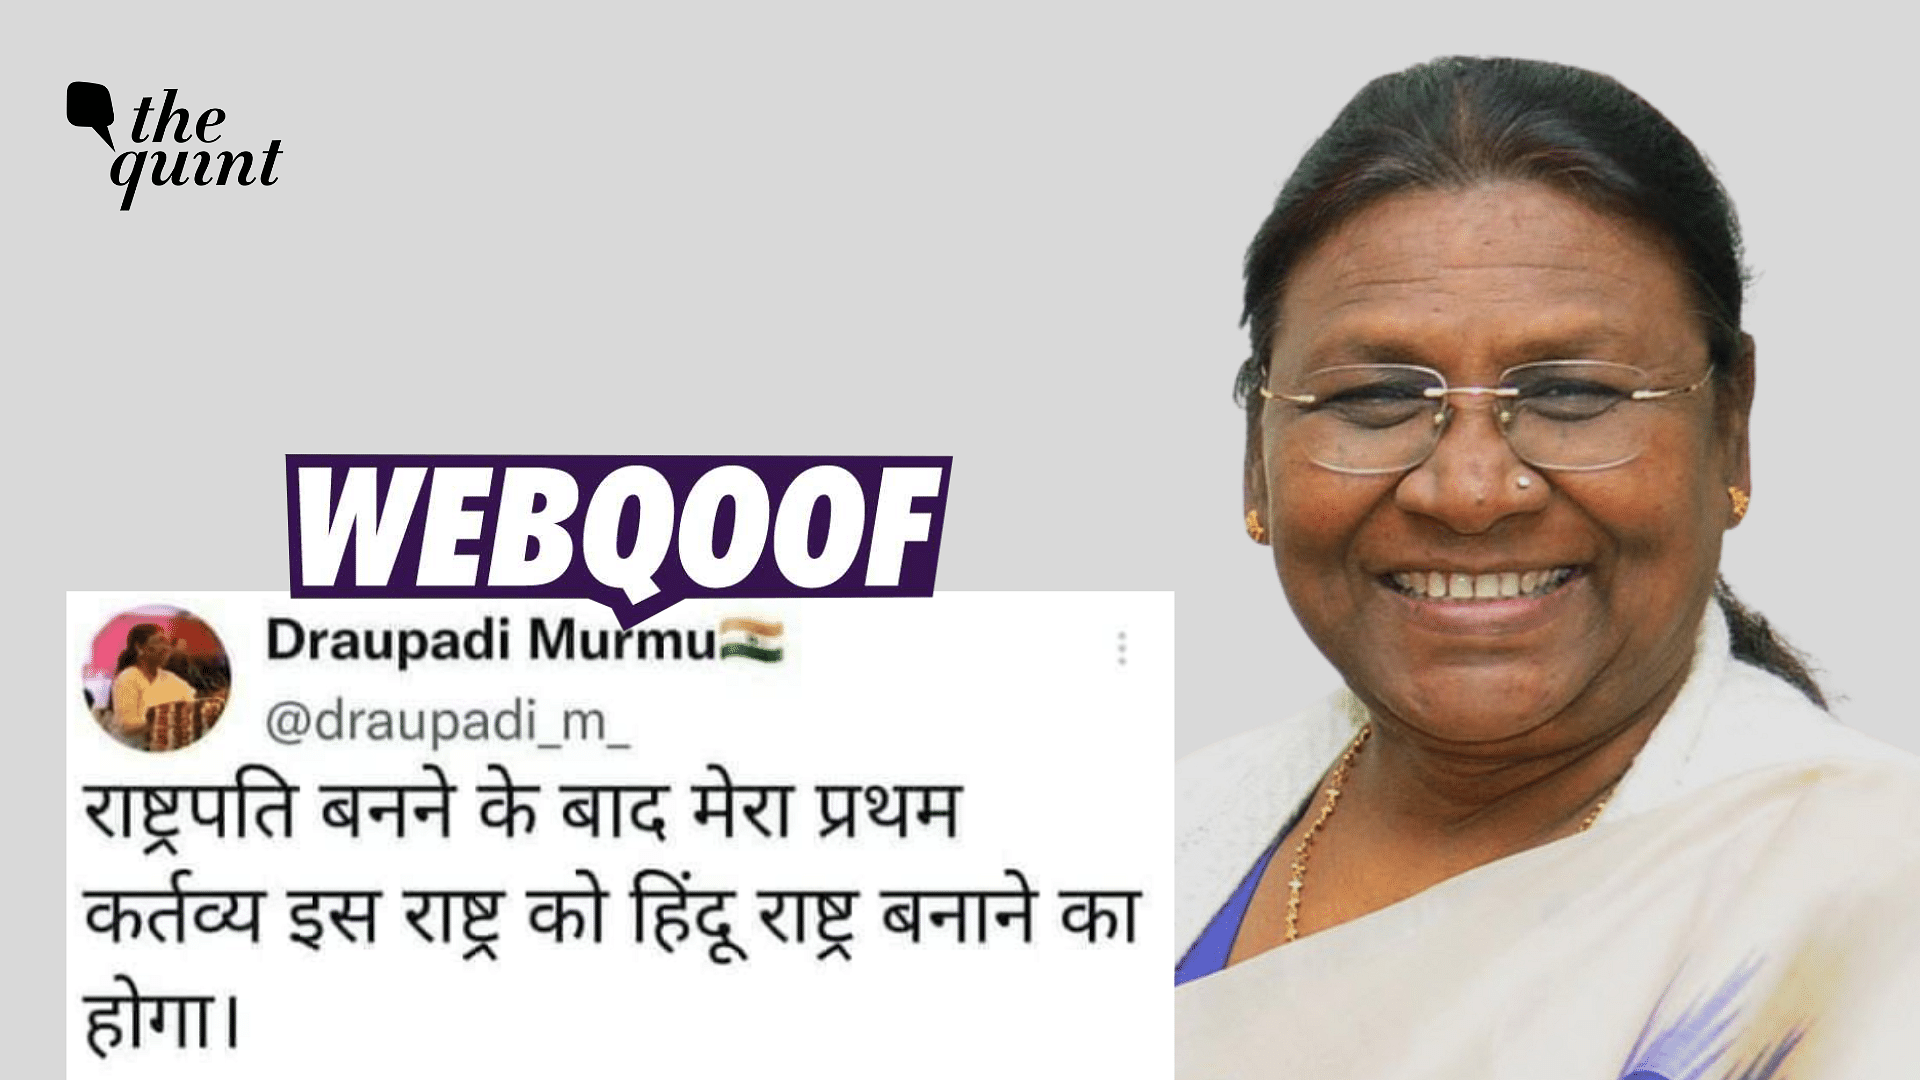 <div class="paragraphs"><p>Fact-check: The claim states that Droupadi Murmu tweeted that she will make India a 'Hindu Rashta' after becoming the President.</p></div>